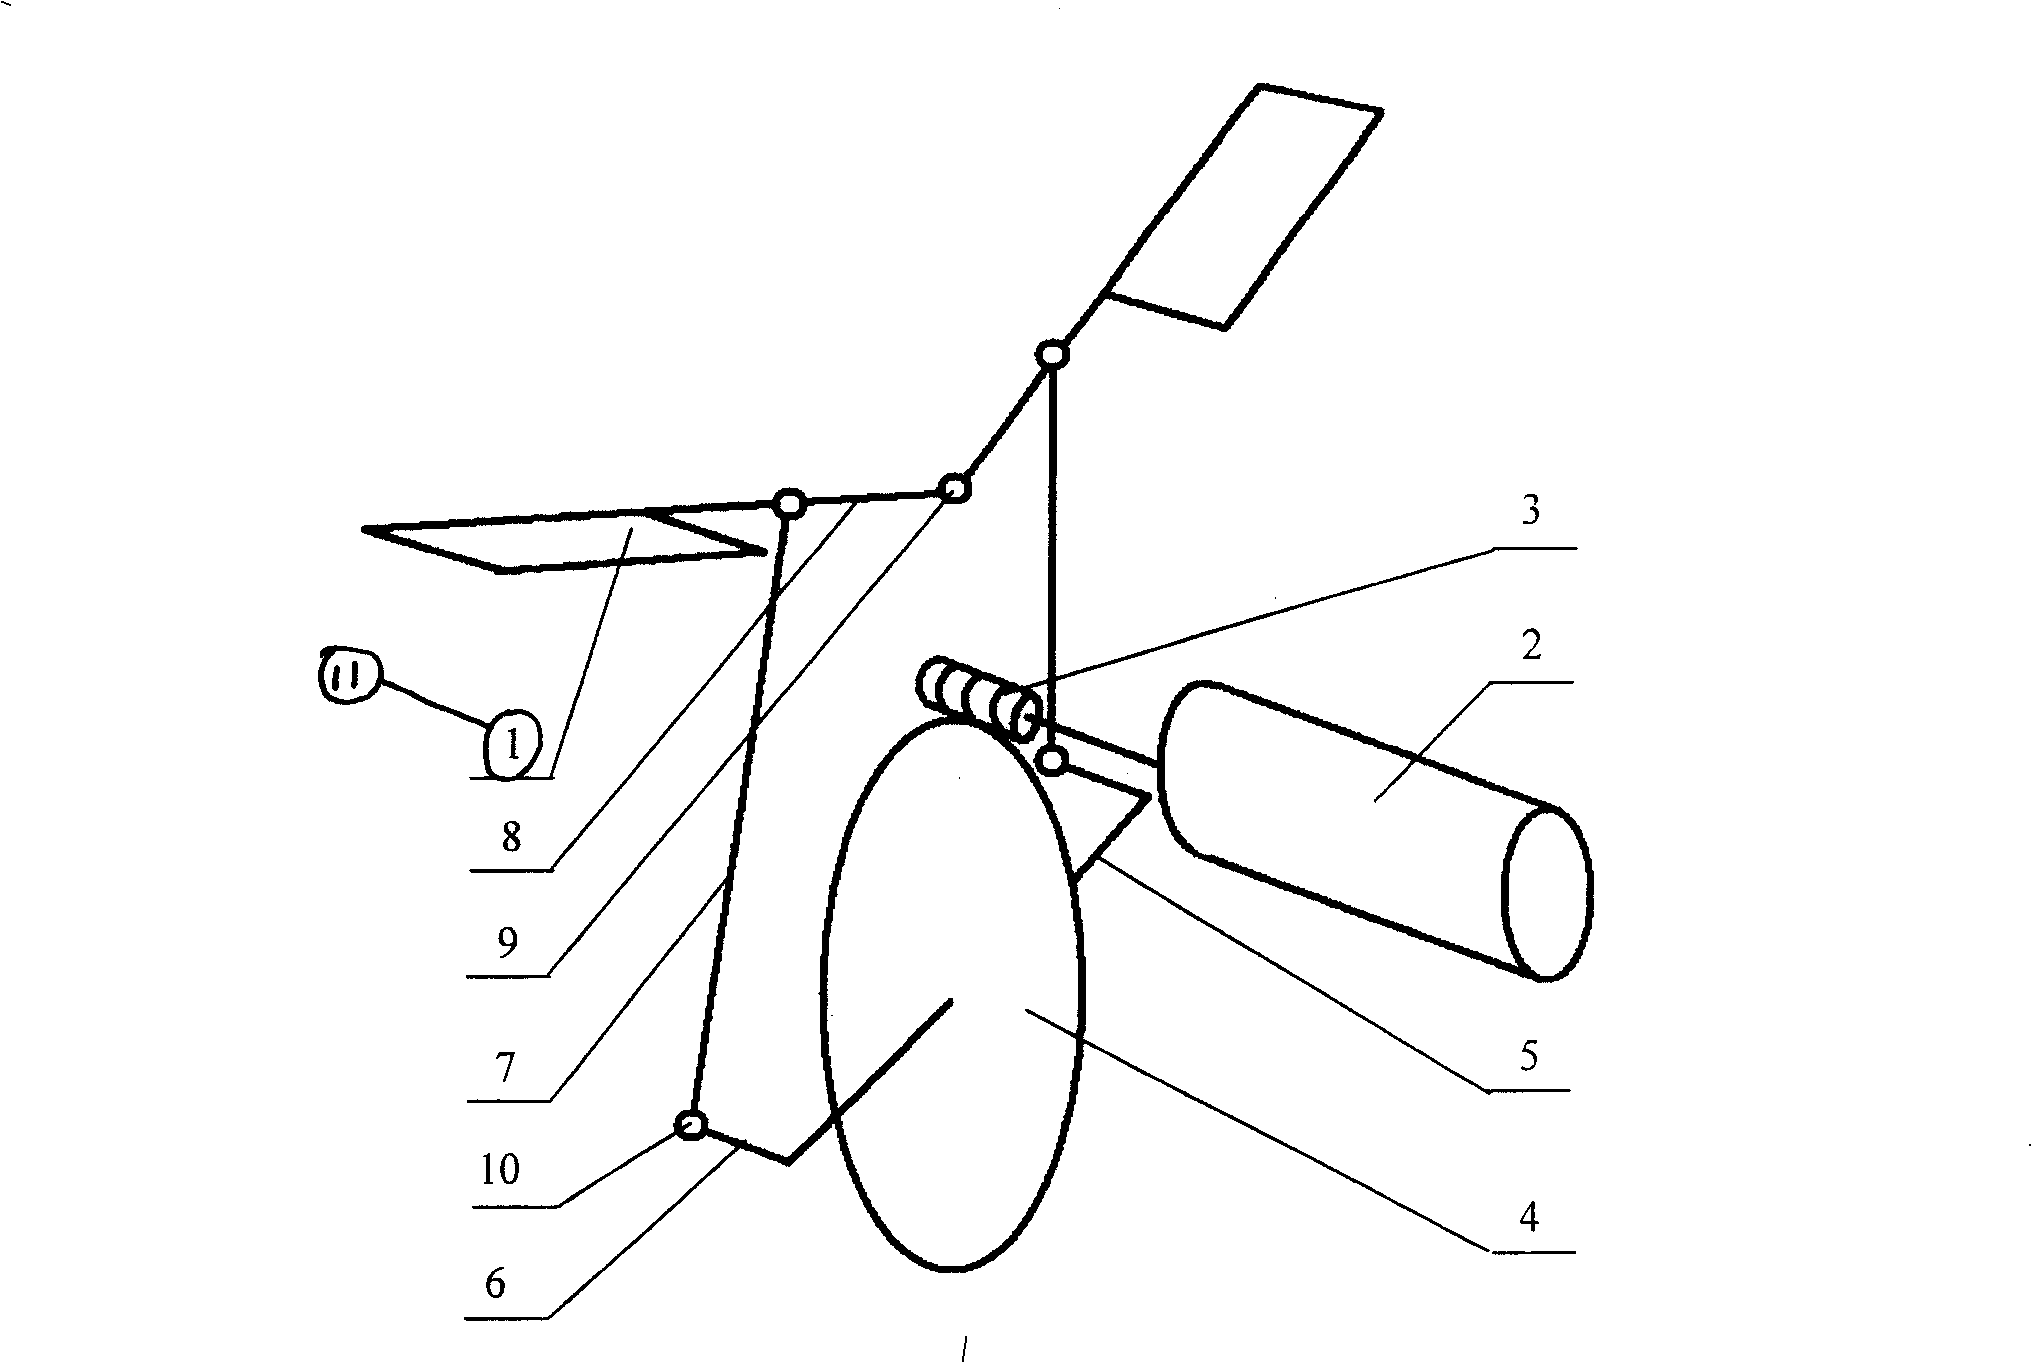 Driving mechanism for wings of minitype ornithopter